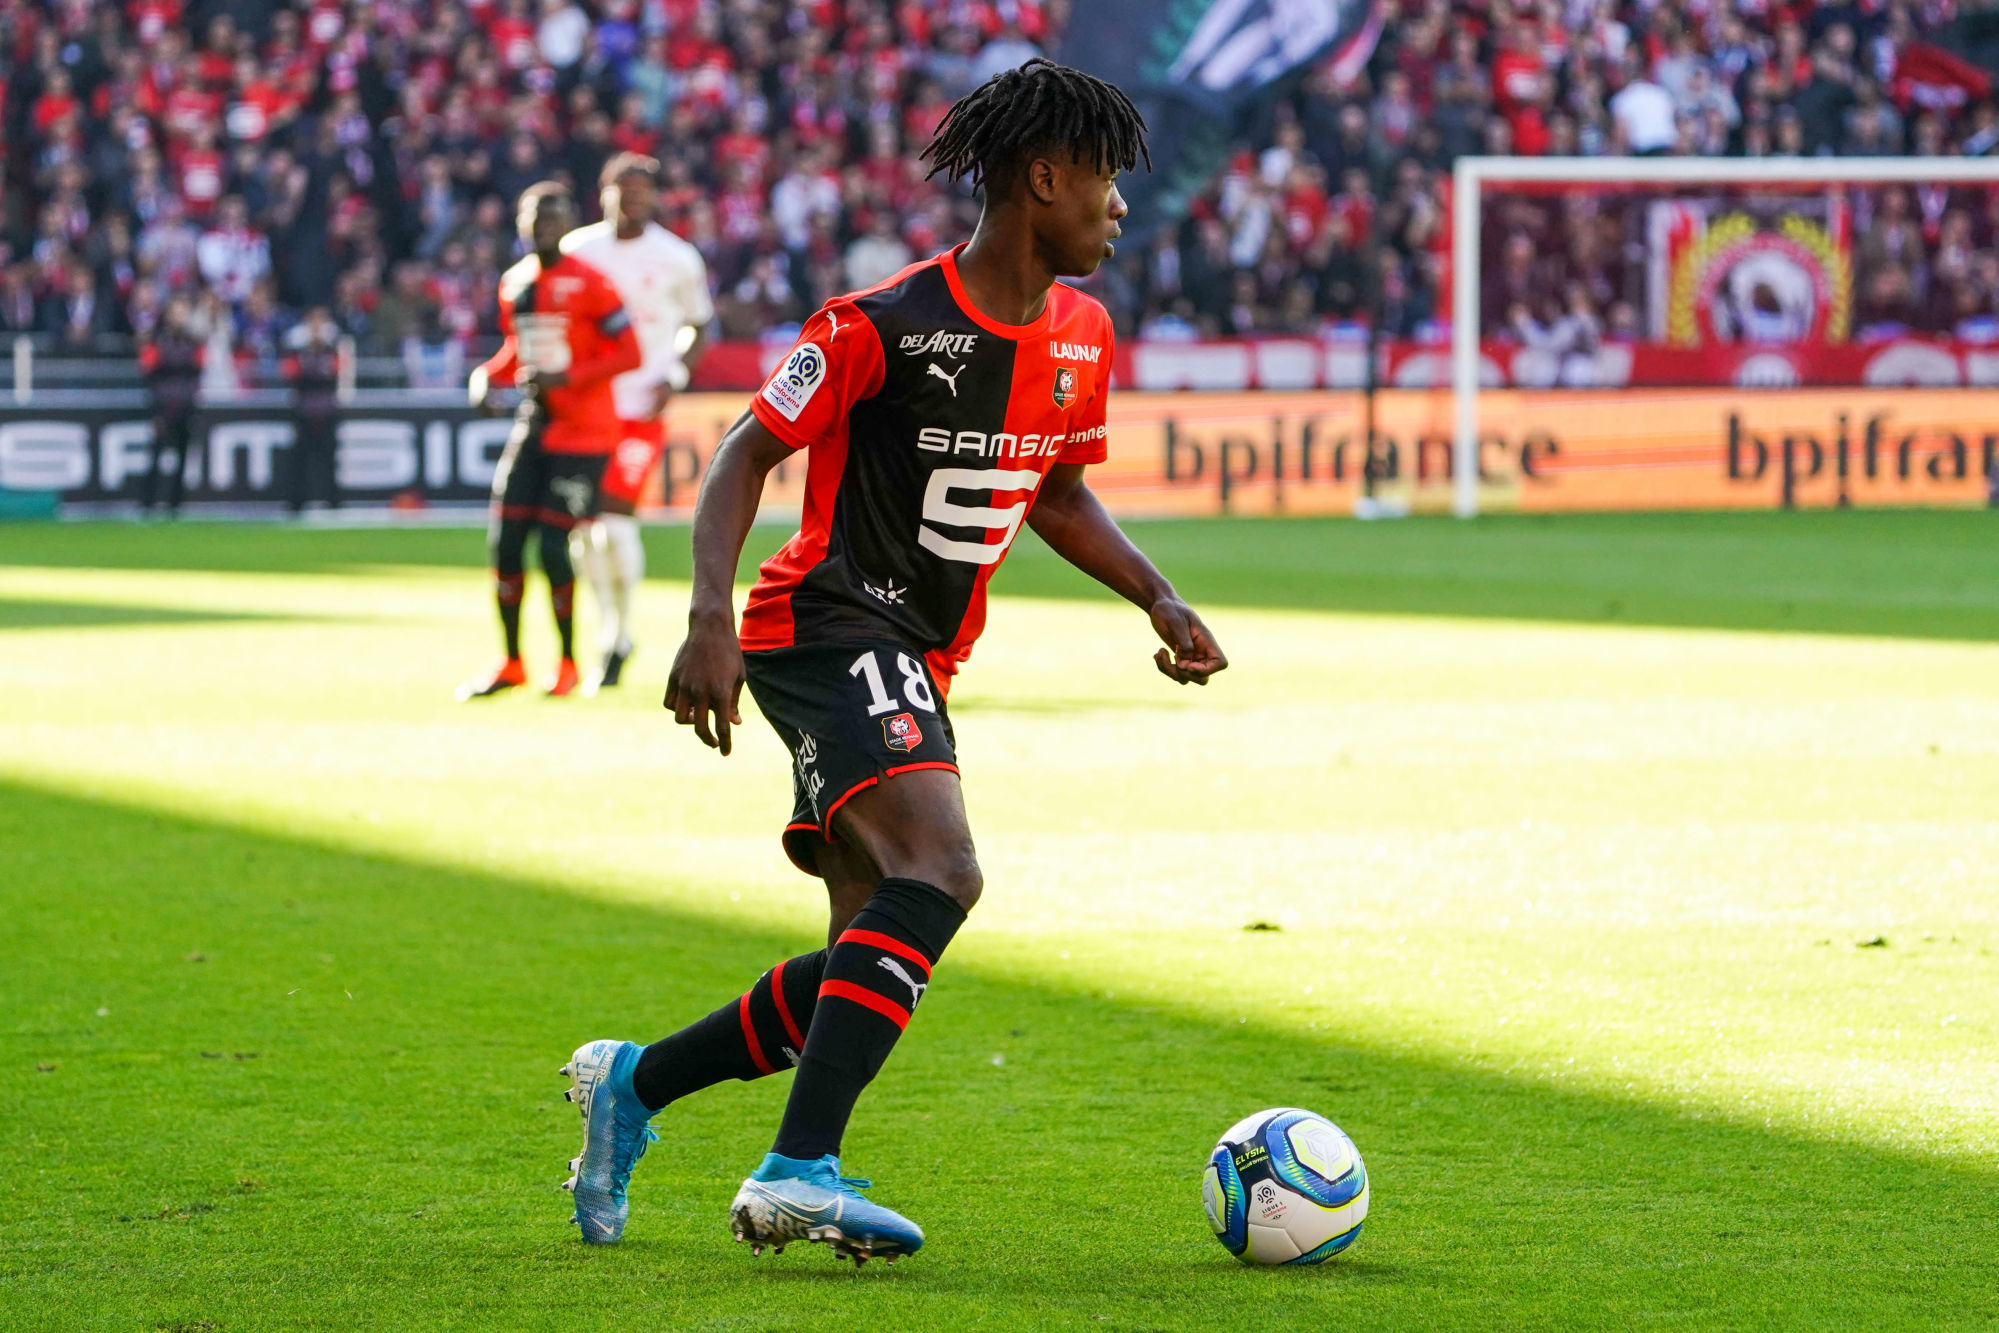 Eduardo CAMAVINGA of Rennes during the Ligue 1 match between Rennes and Reims on October 6, 2019 in Rennes, France. (Photo by Eddy Lemaistre/Icon Sport) - Eduardo CAMAVINGA - Roazhon Park - Rennes (France)